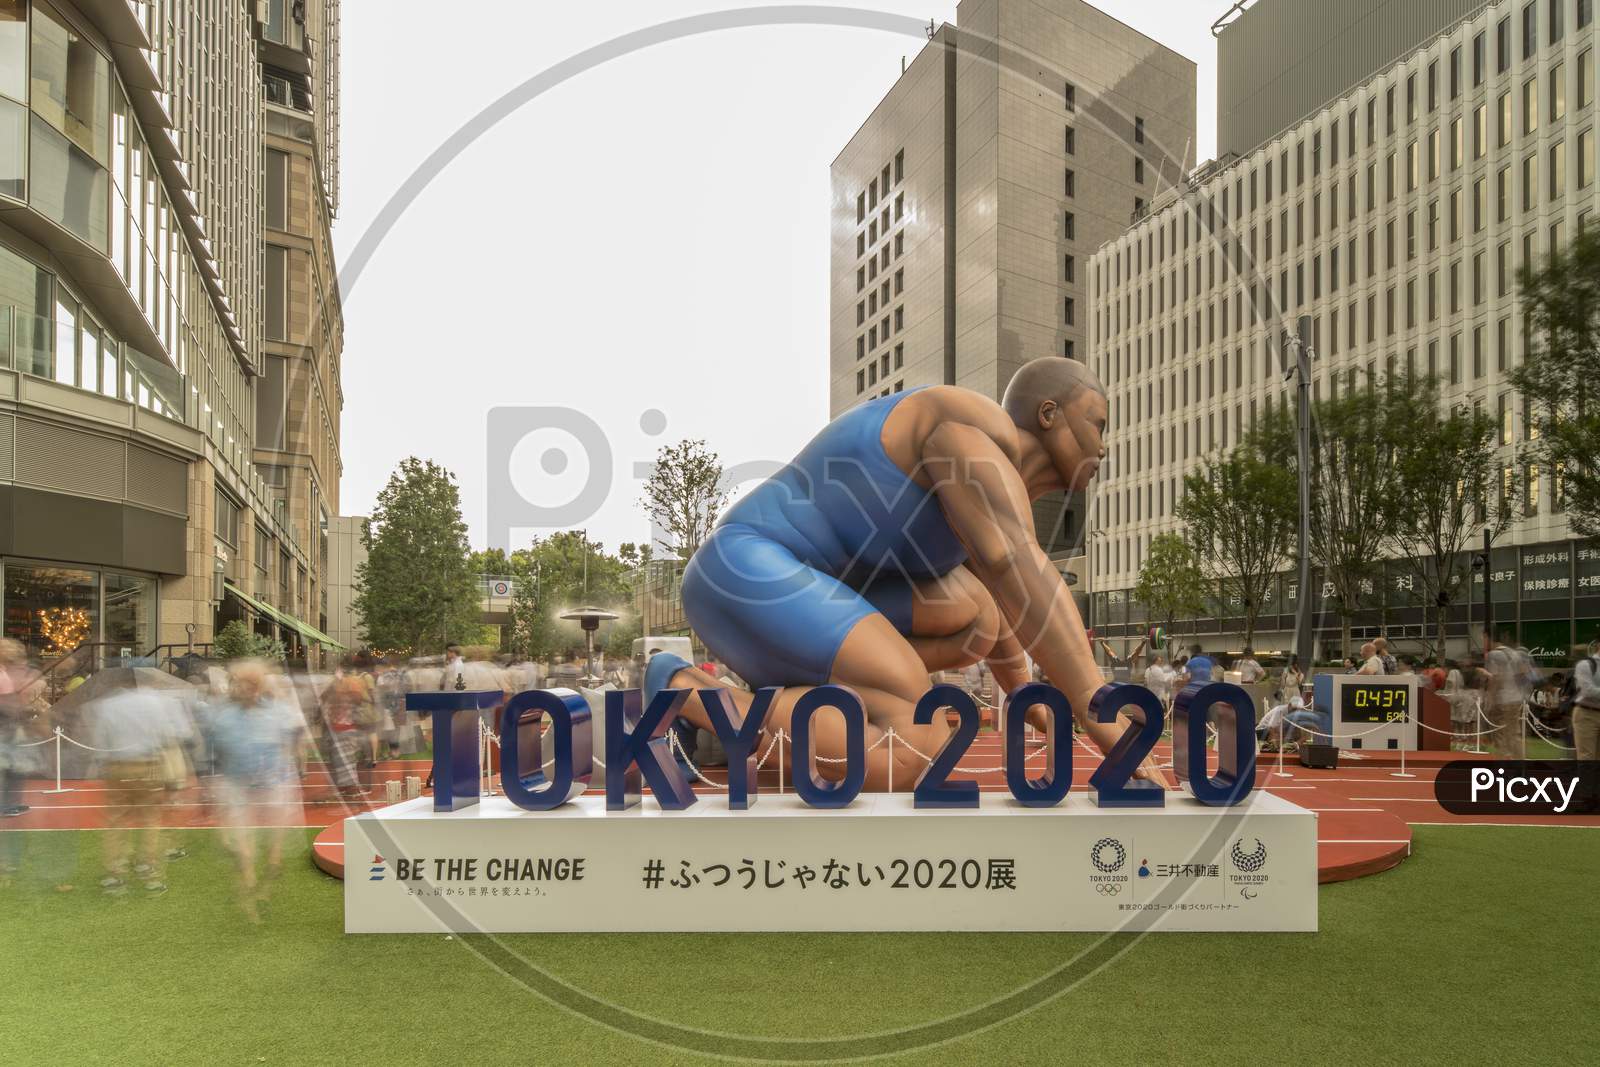 Event "Be the change Tokyo 2020" organized on the theme of the future Olympic Games in Tokyo in 2020.